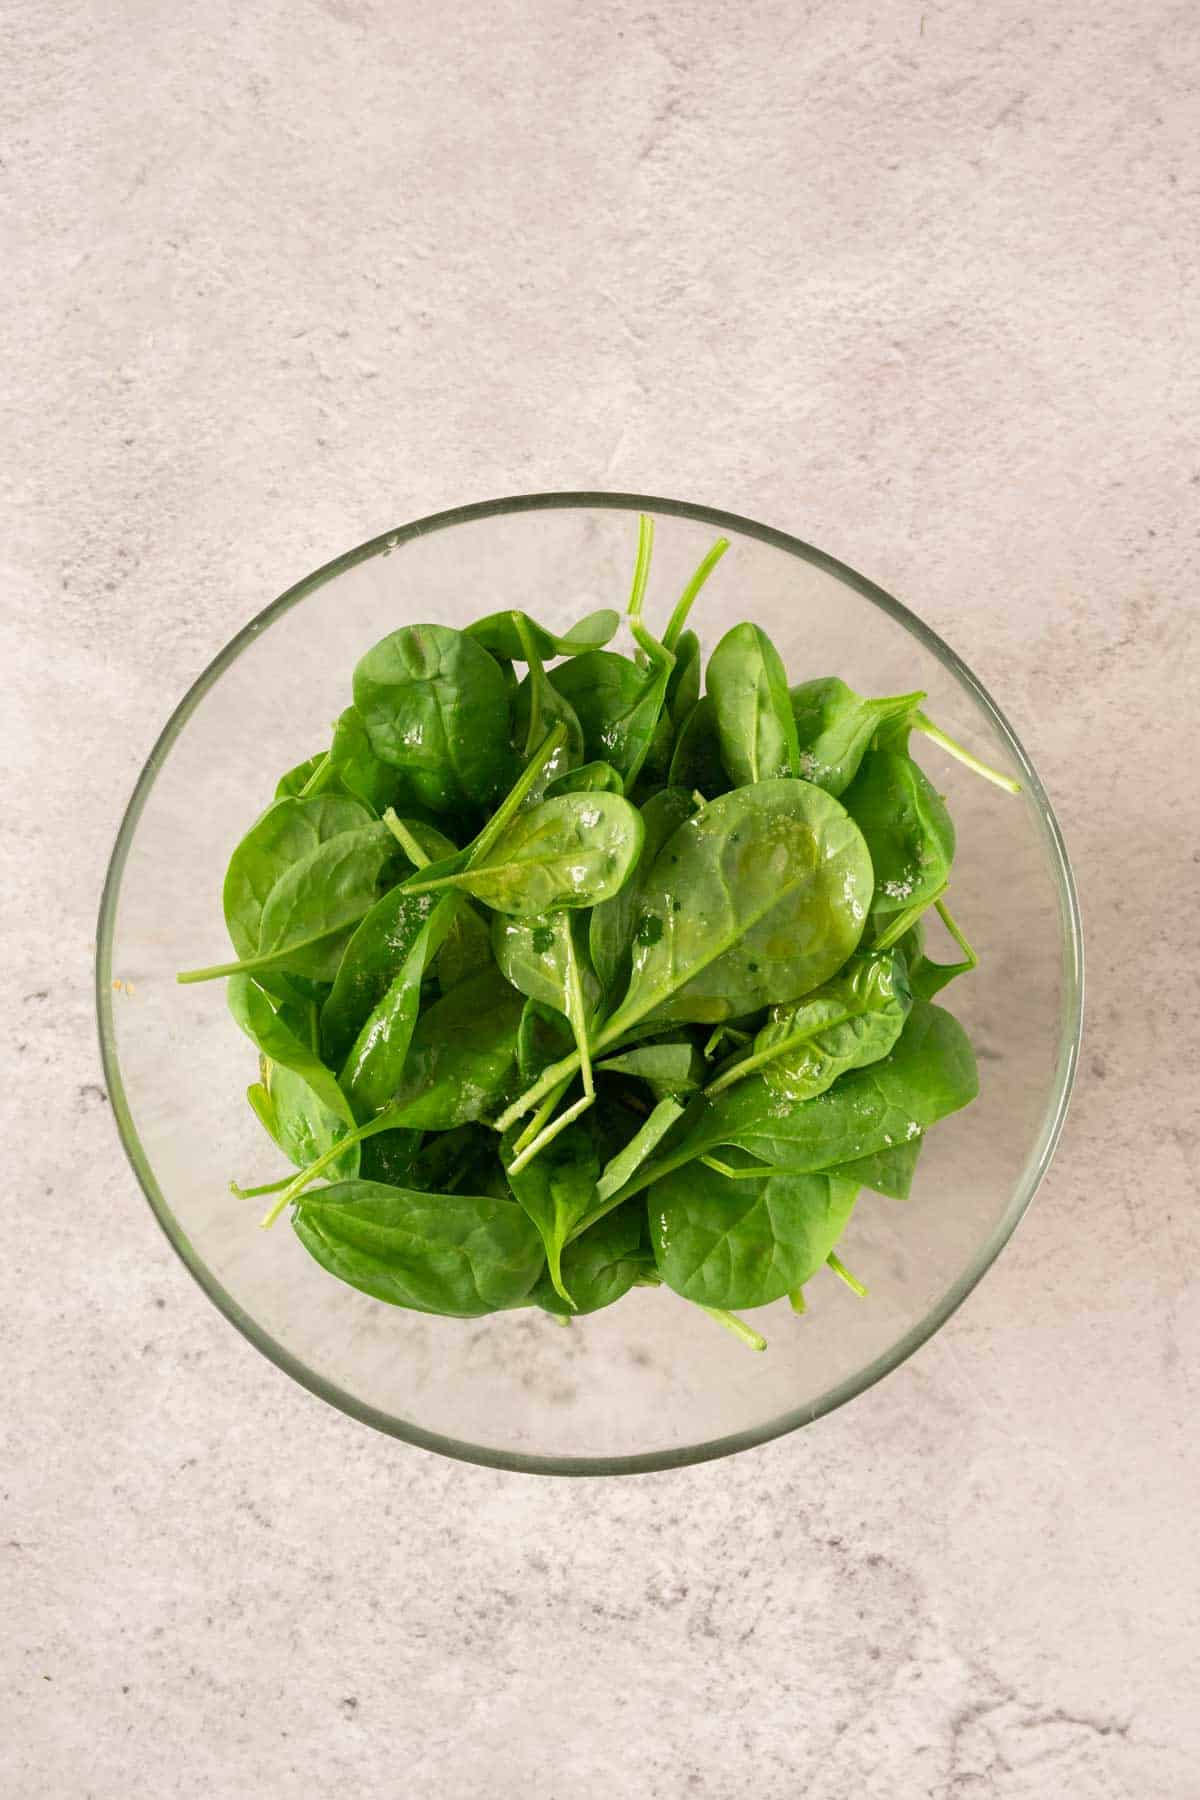 Spinach in a glass bowl on a concrete surface.